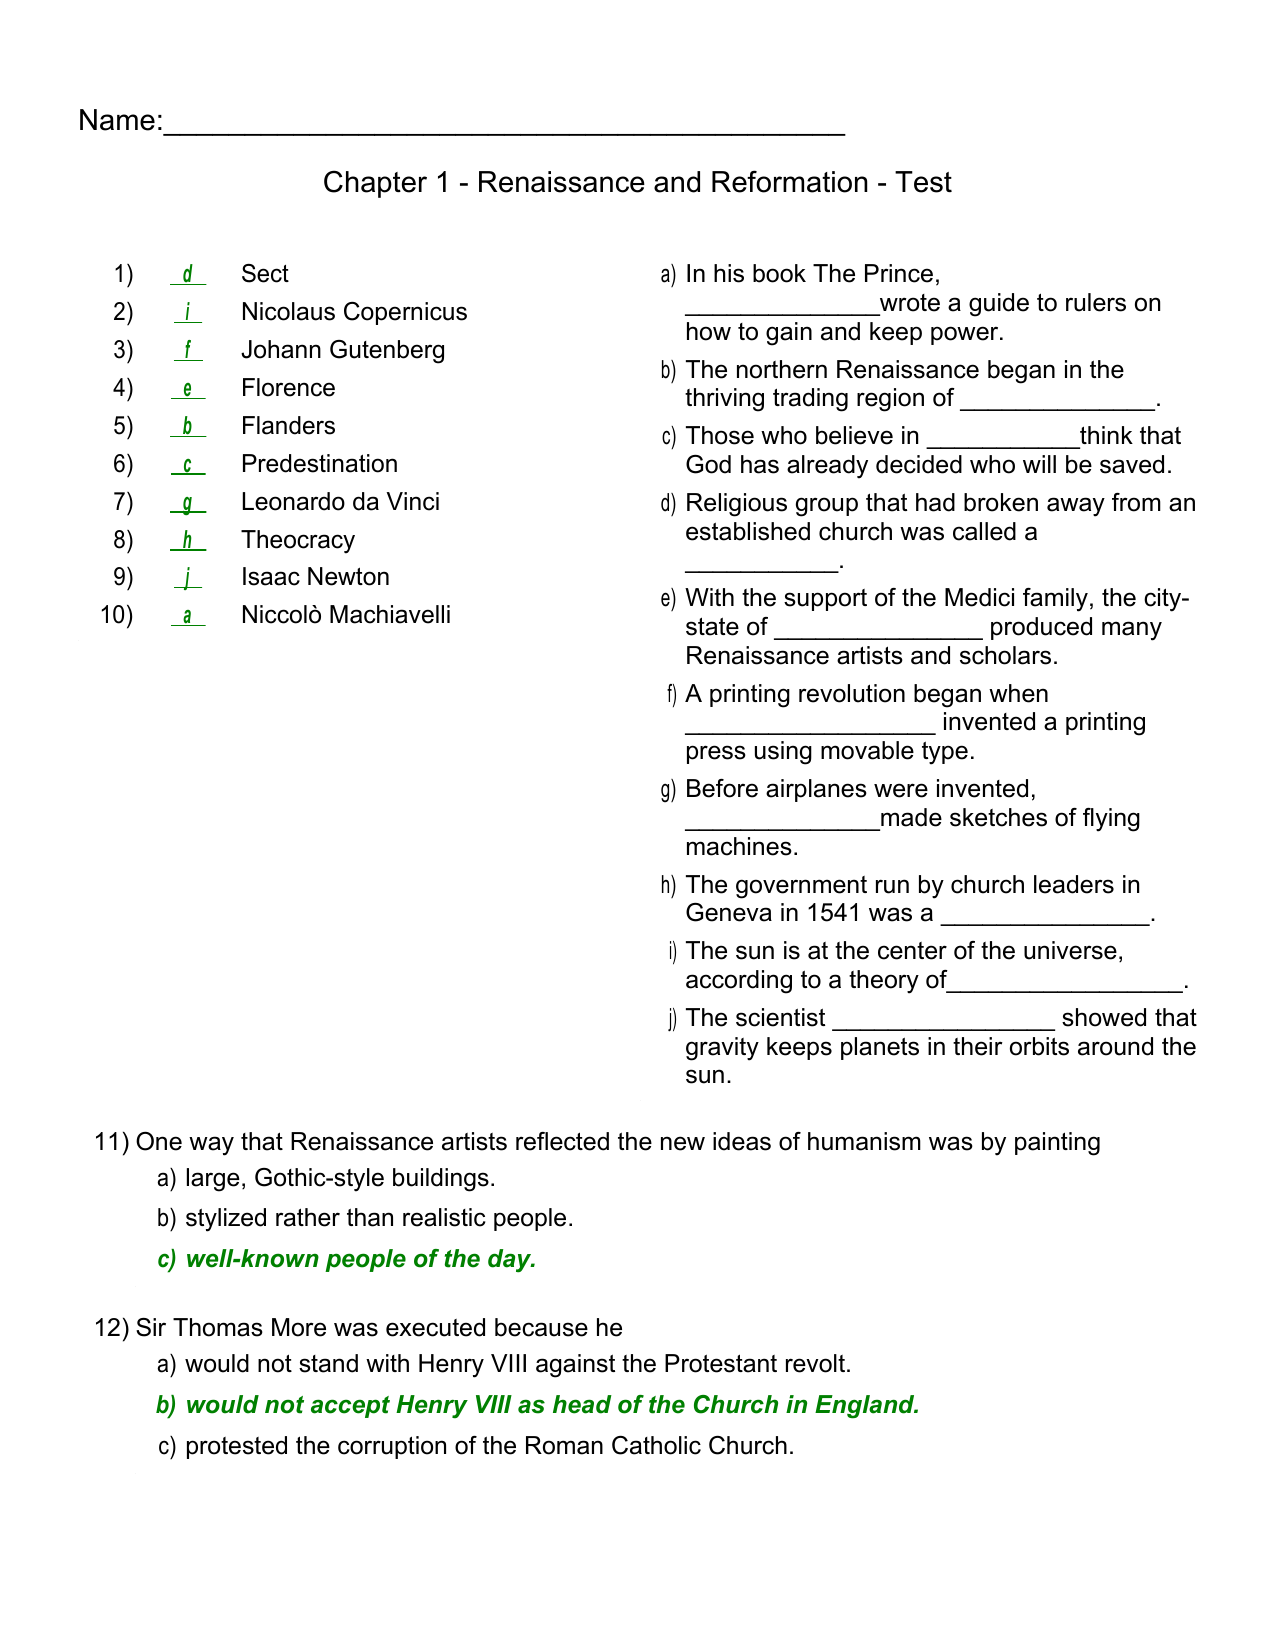 Chapter 22 - Renaissance and Reformation In Protestant Reformation Worksheet Answers